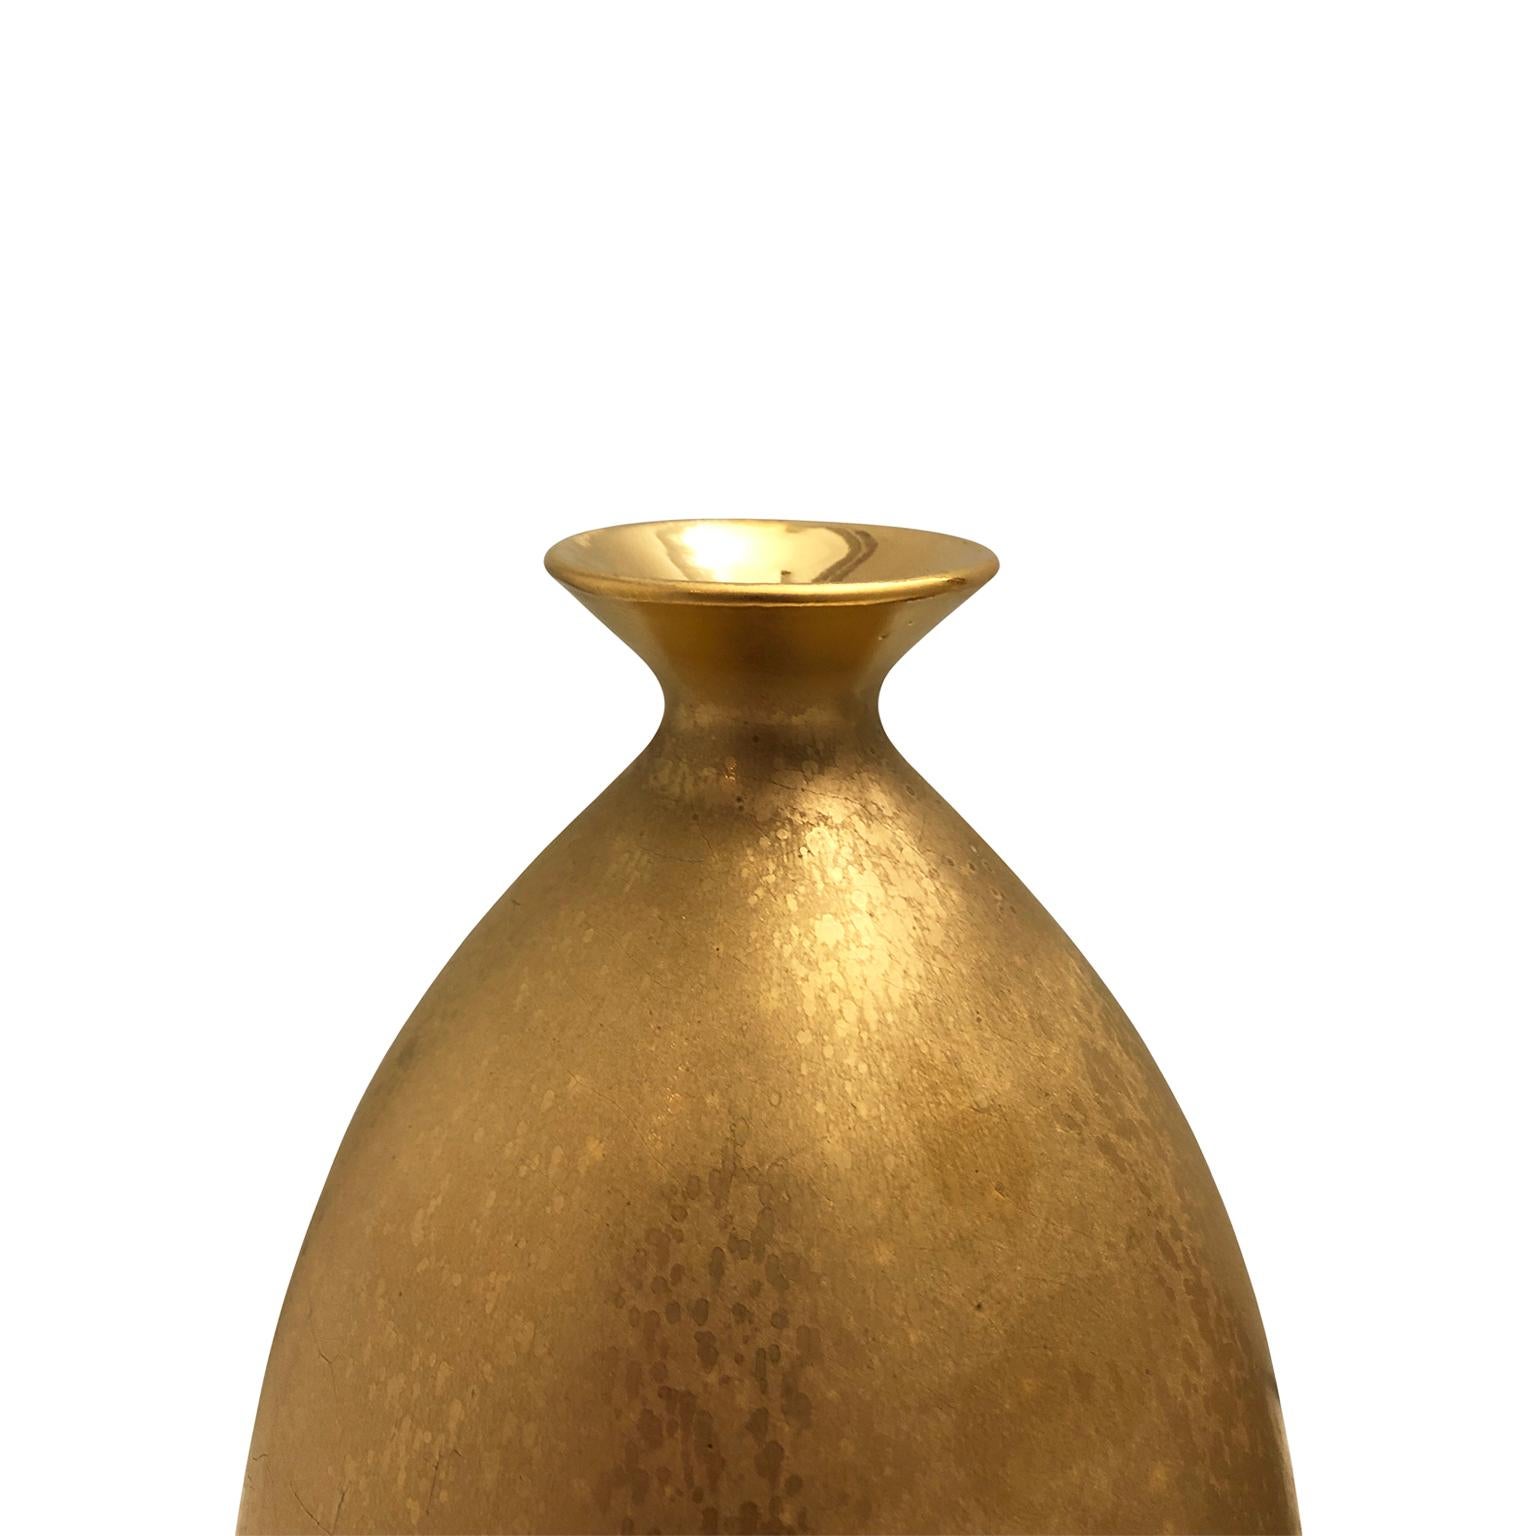 Medium ceramic bottle vase with flared bottom and burnished gold lustre glaze by Sandi Fellman, 2019. 

Veteran photographer Sandi Fellman's ceramic vessels are an exploration of a new medium. The forms, palettes, and sensuality of her photos can